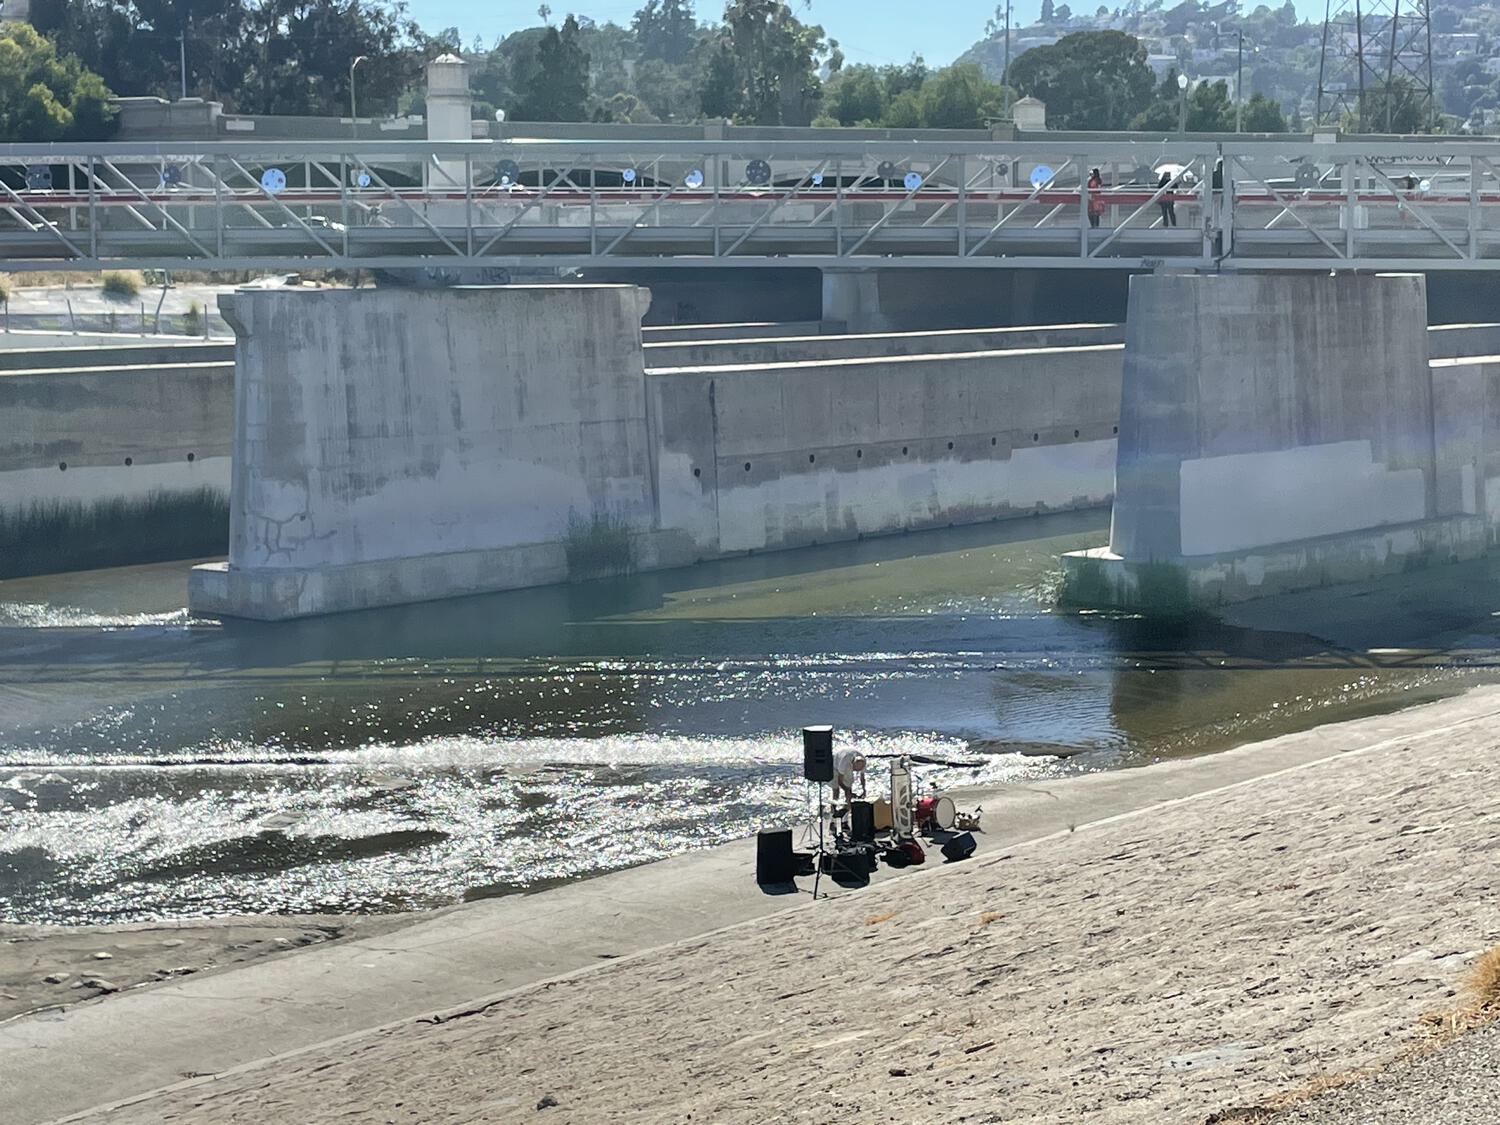 A distant view of an art installation on the Red Car Bridge, as well as a musician setting up equipment on the bank of the LA River